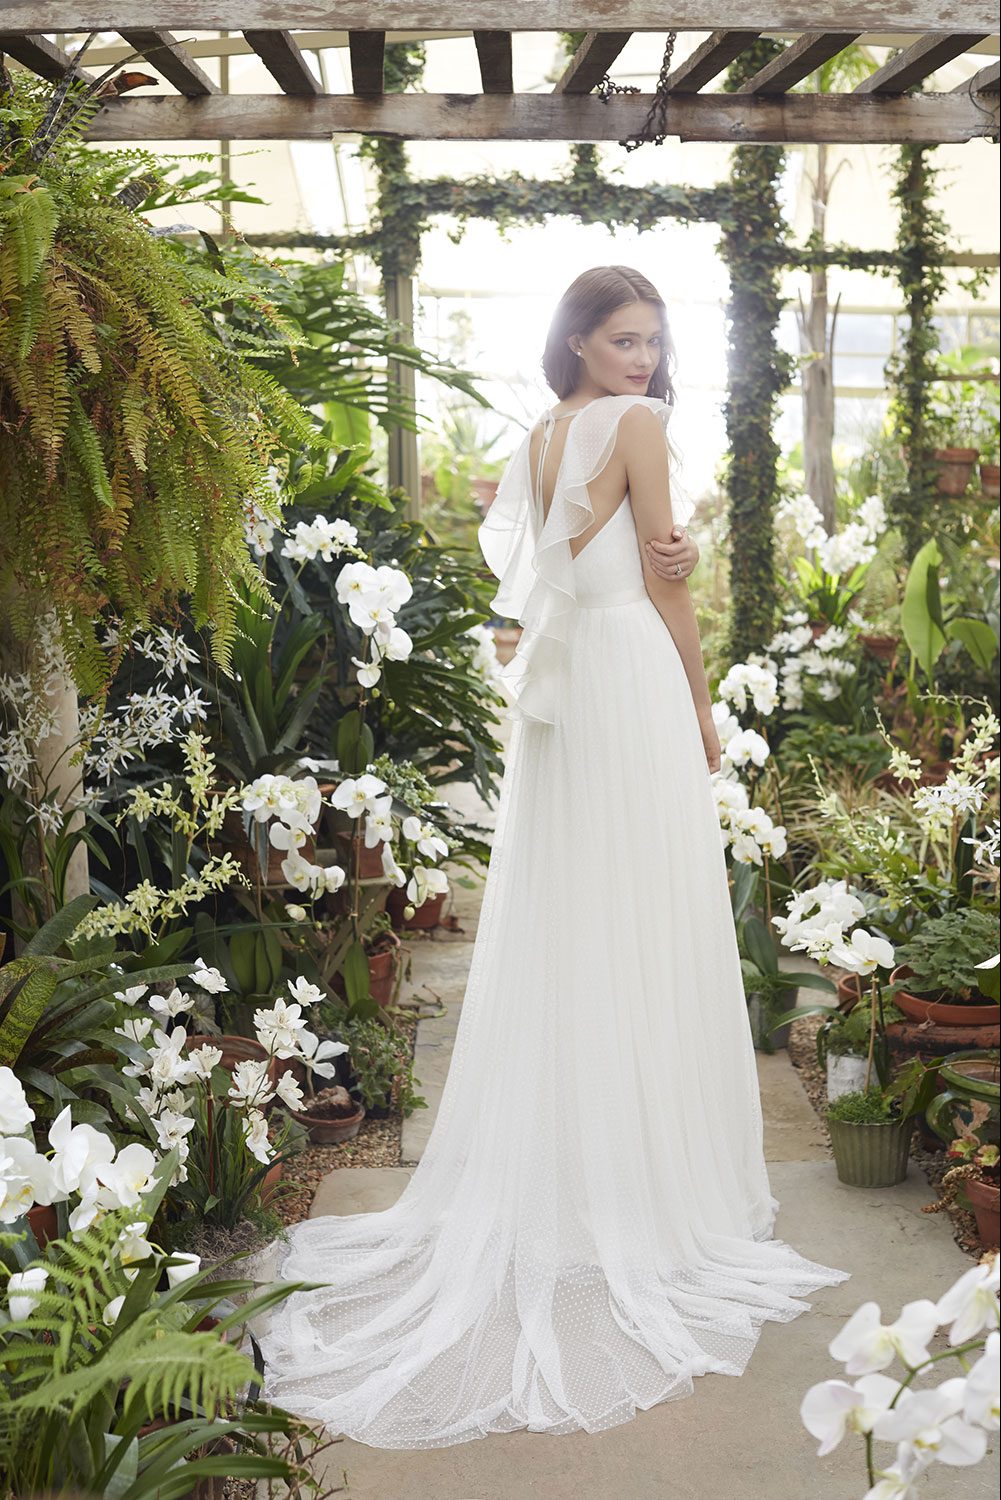  Bridal  Dresses  from Theia Bridal  Formal Dresses  in 